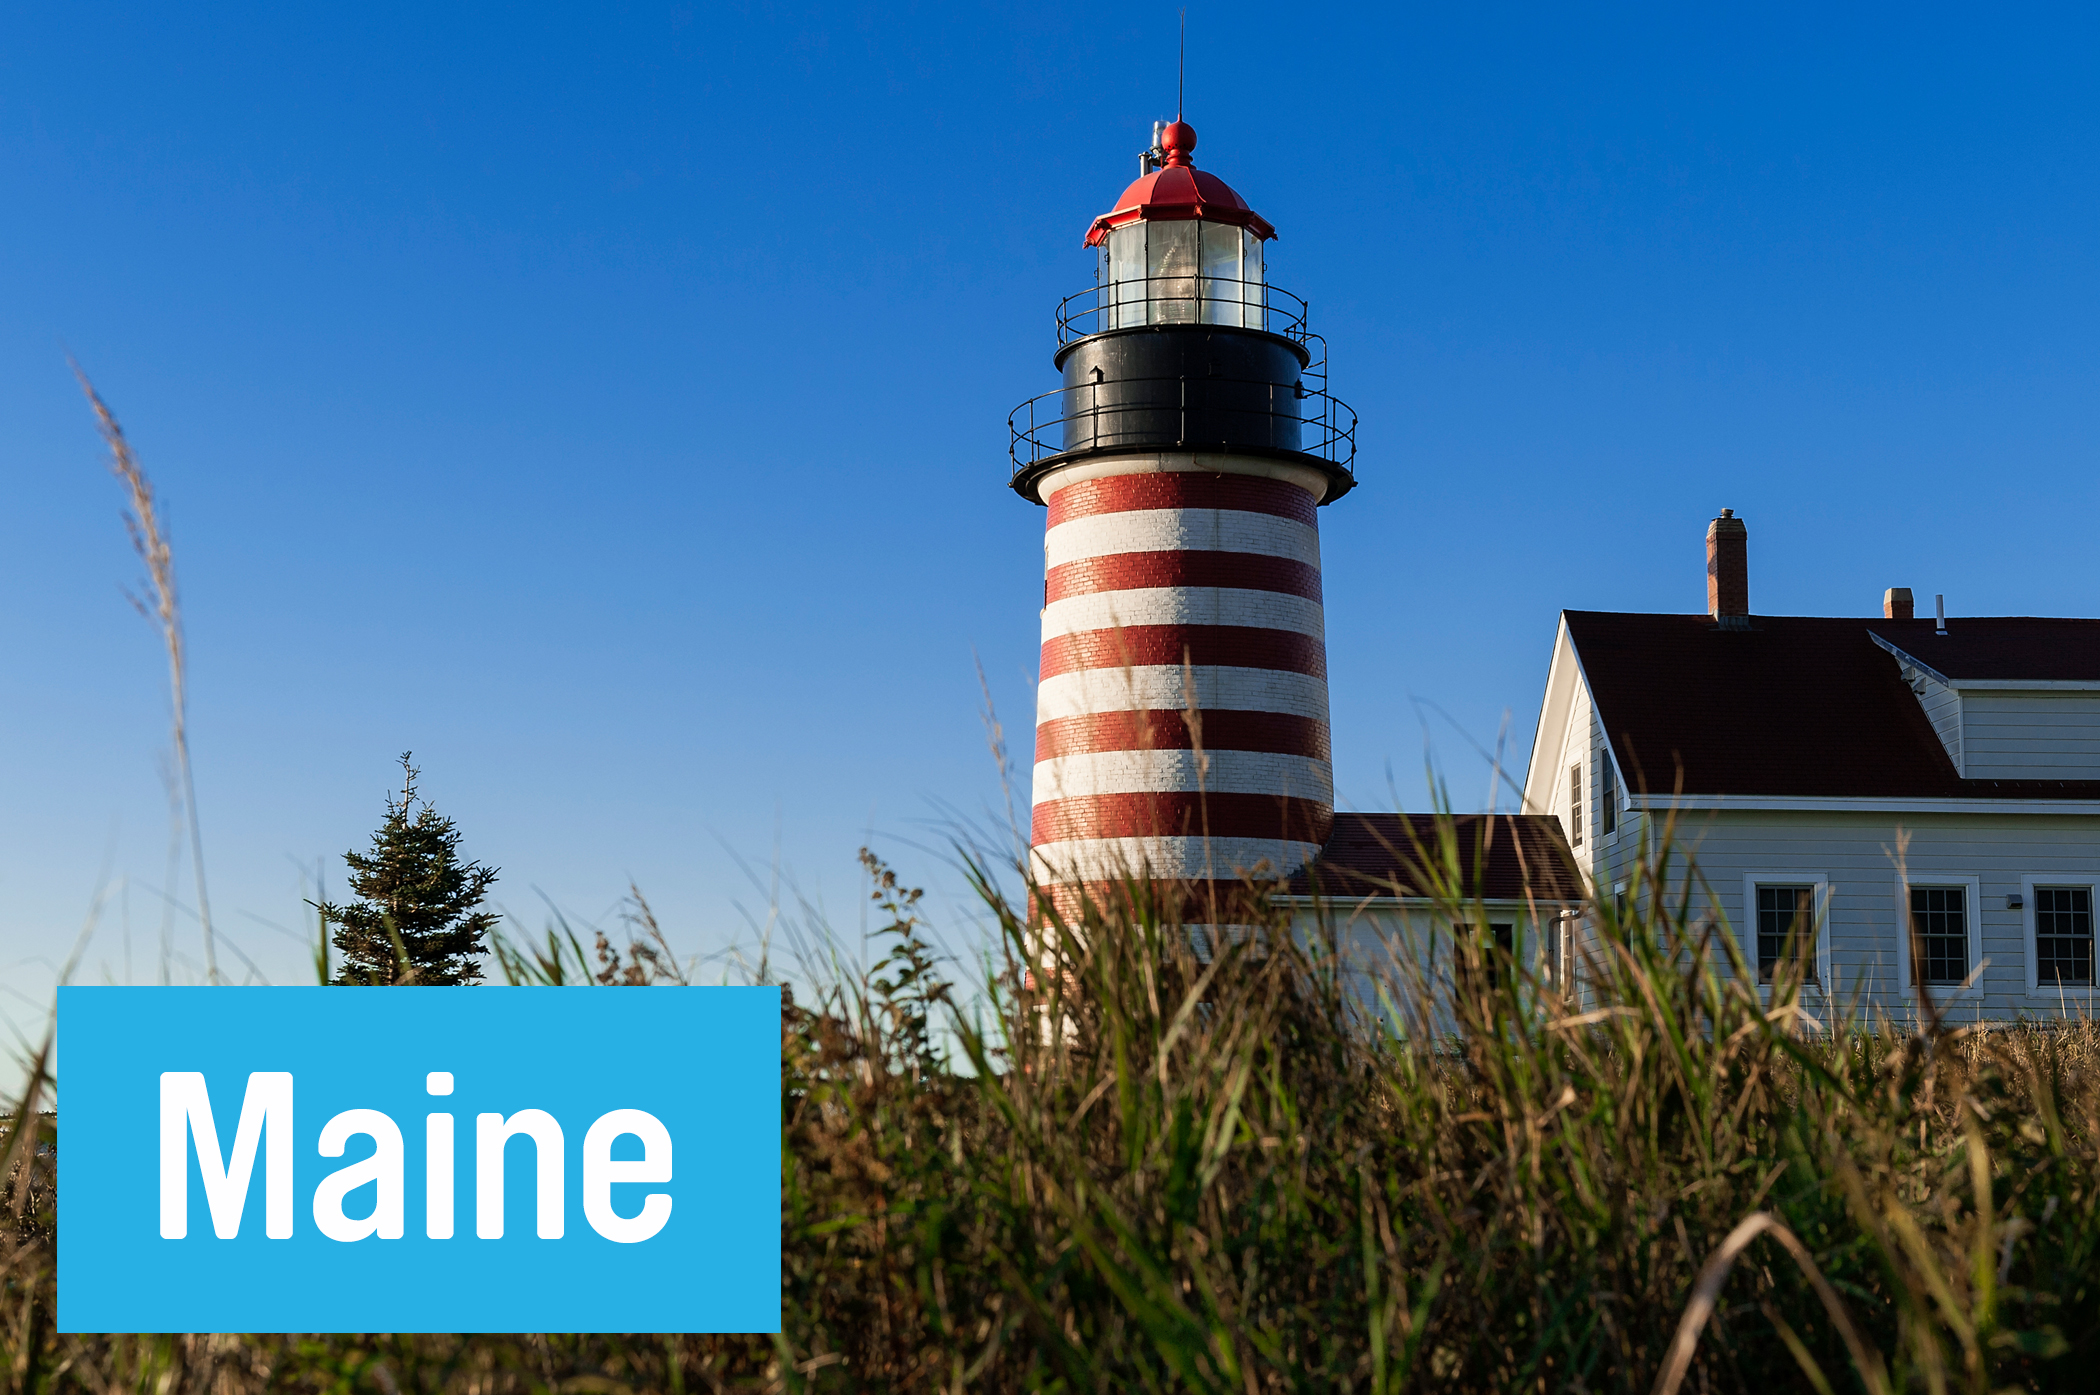 Pretend you’re a Light Keeper at Lubec’s 1858 lighthouse at <a href="http://www.westquoddy.com/wq_visitor_center.htm" target="_blank">West Quoddy Head Light Keepers Association,</a> keeping your eyes out for seals and humpback whales along the coastline.